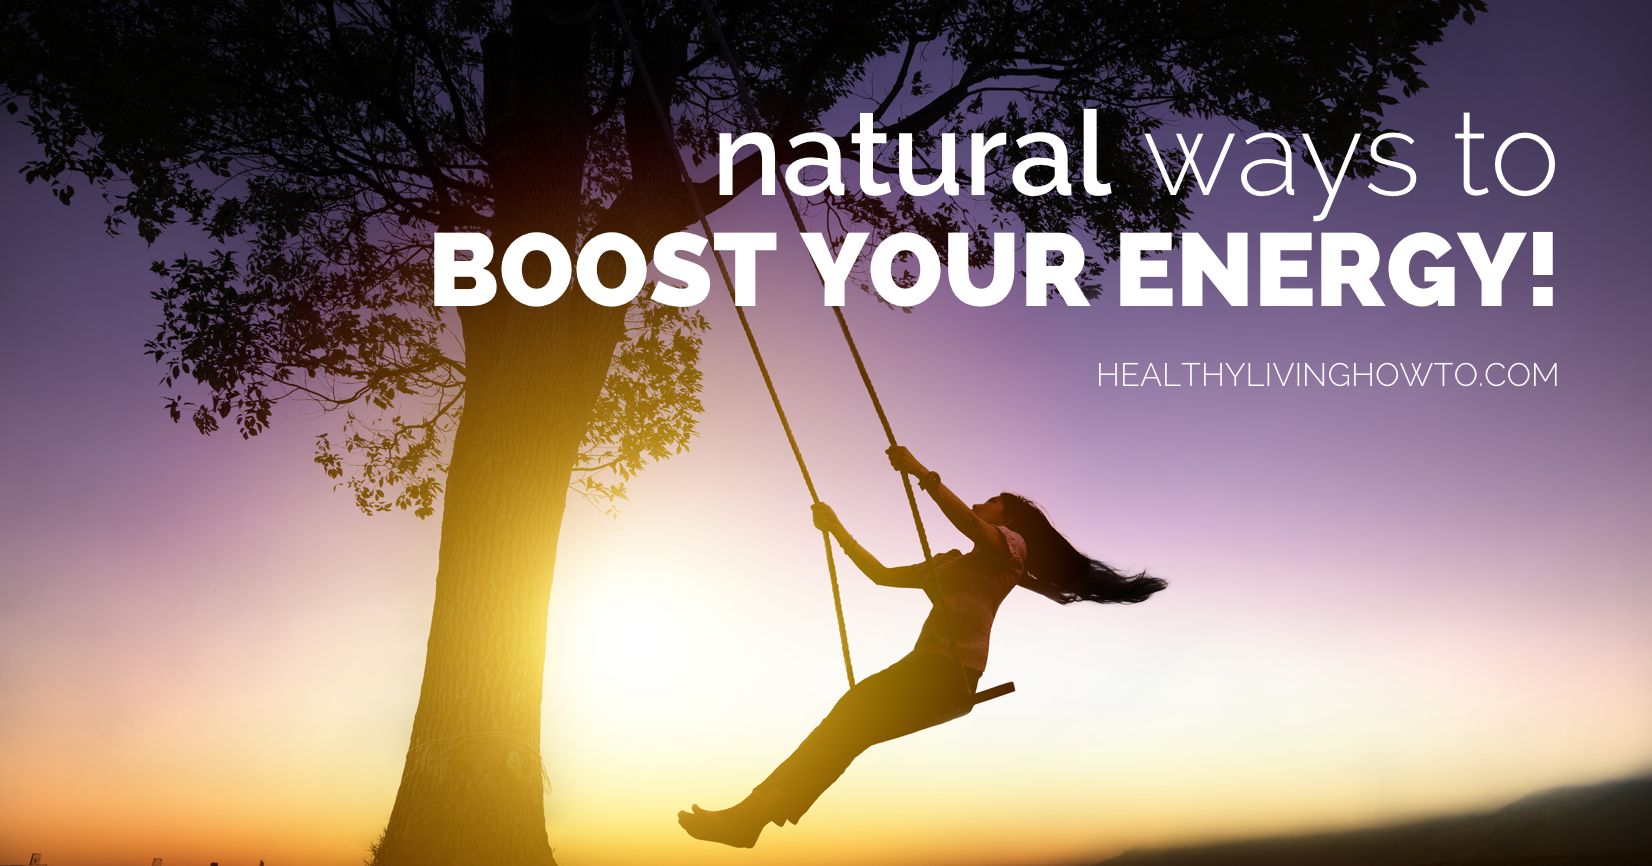 Natural Ways To Boost Your Energy | healthylivinghowto.com